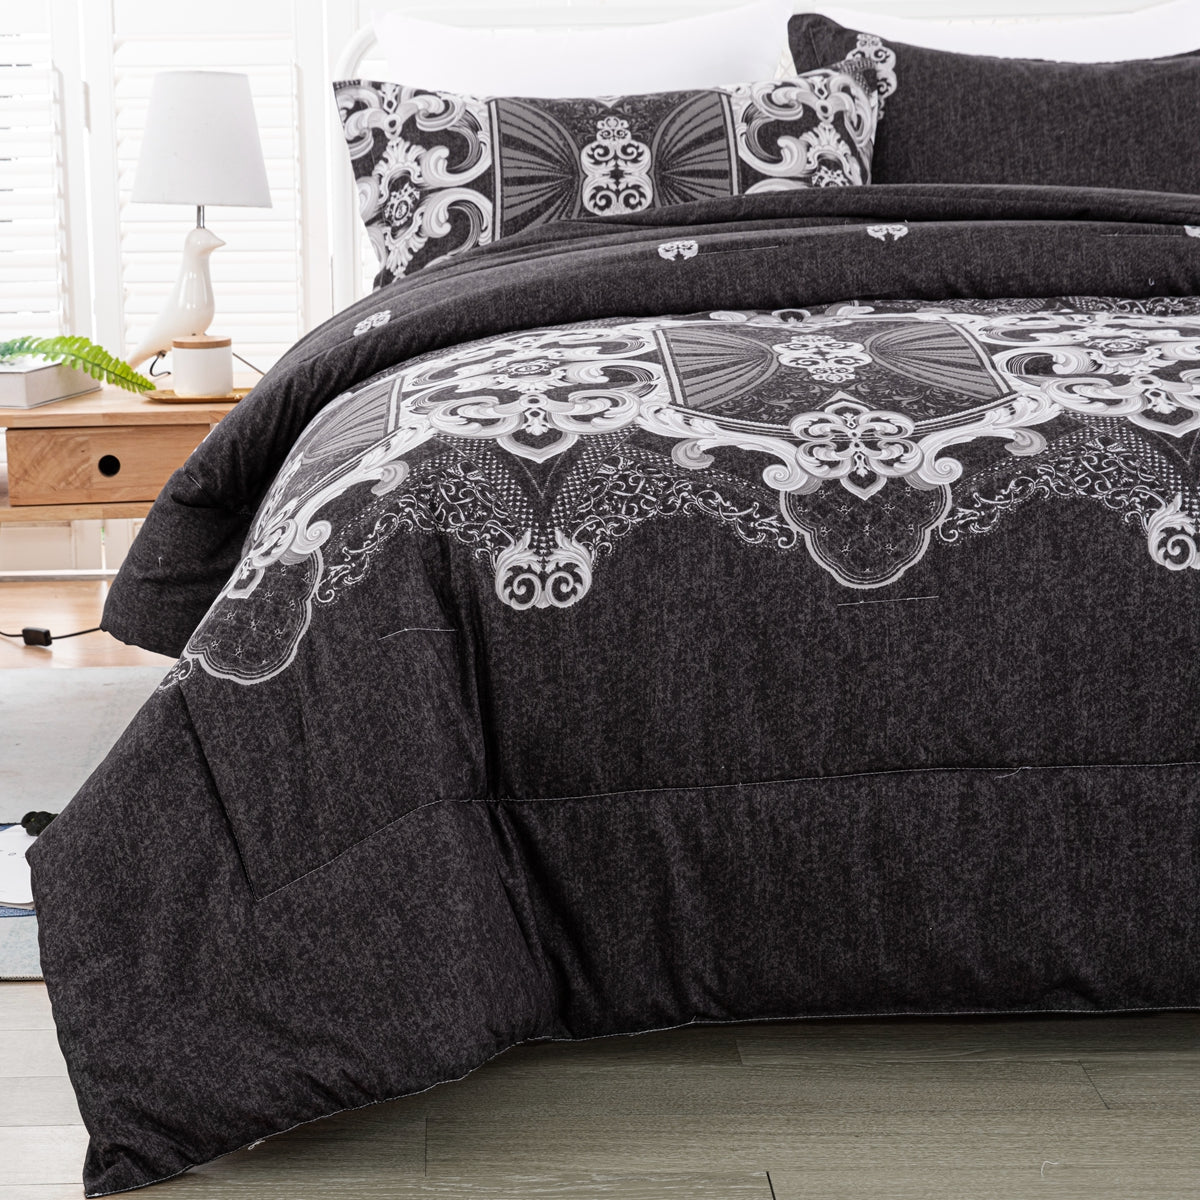 WONGS BEDDING Black Style Comforter Set with 2 Pillow Cases